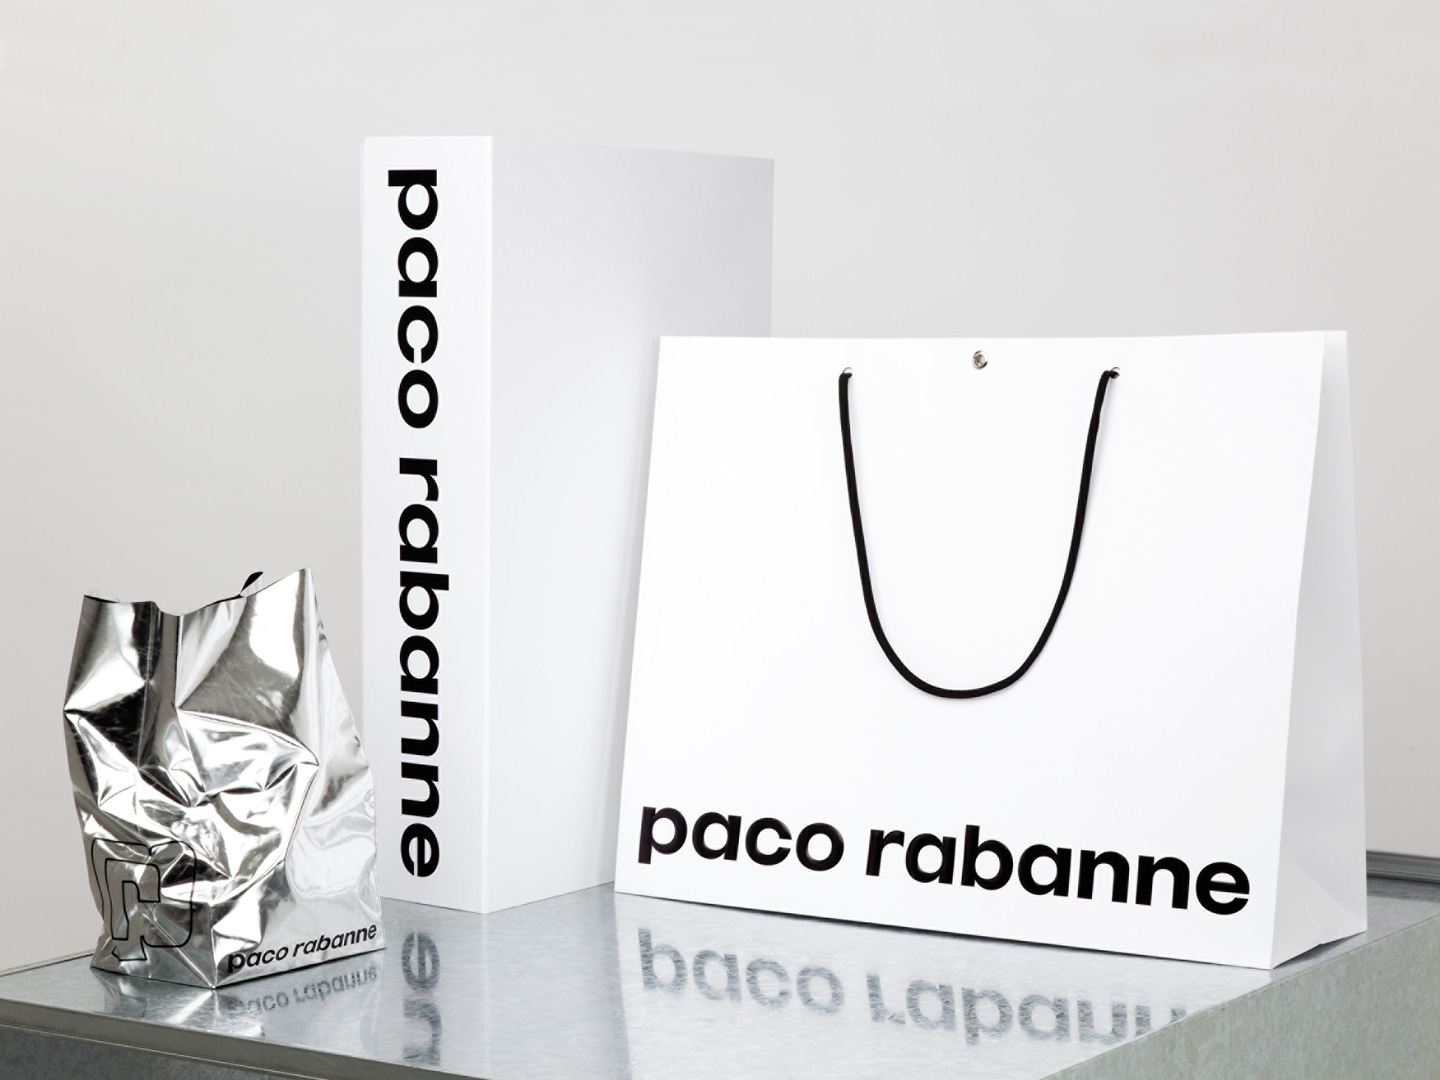 Brand book, brand identity and shopping bags for French fashion label Paco Rabanne by Zak Group, United Kingdom